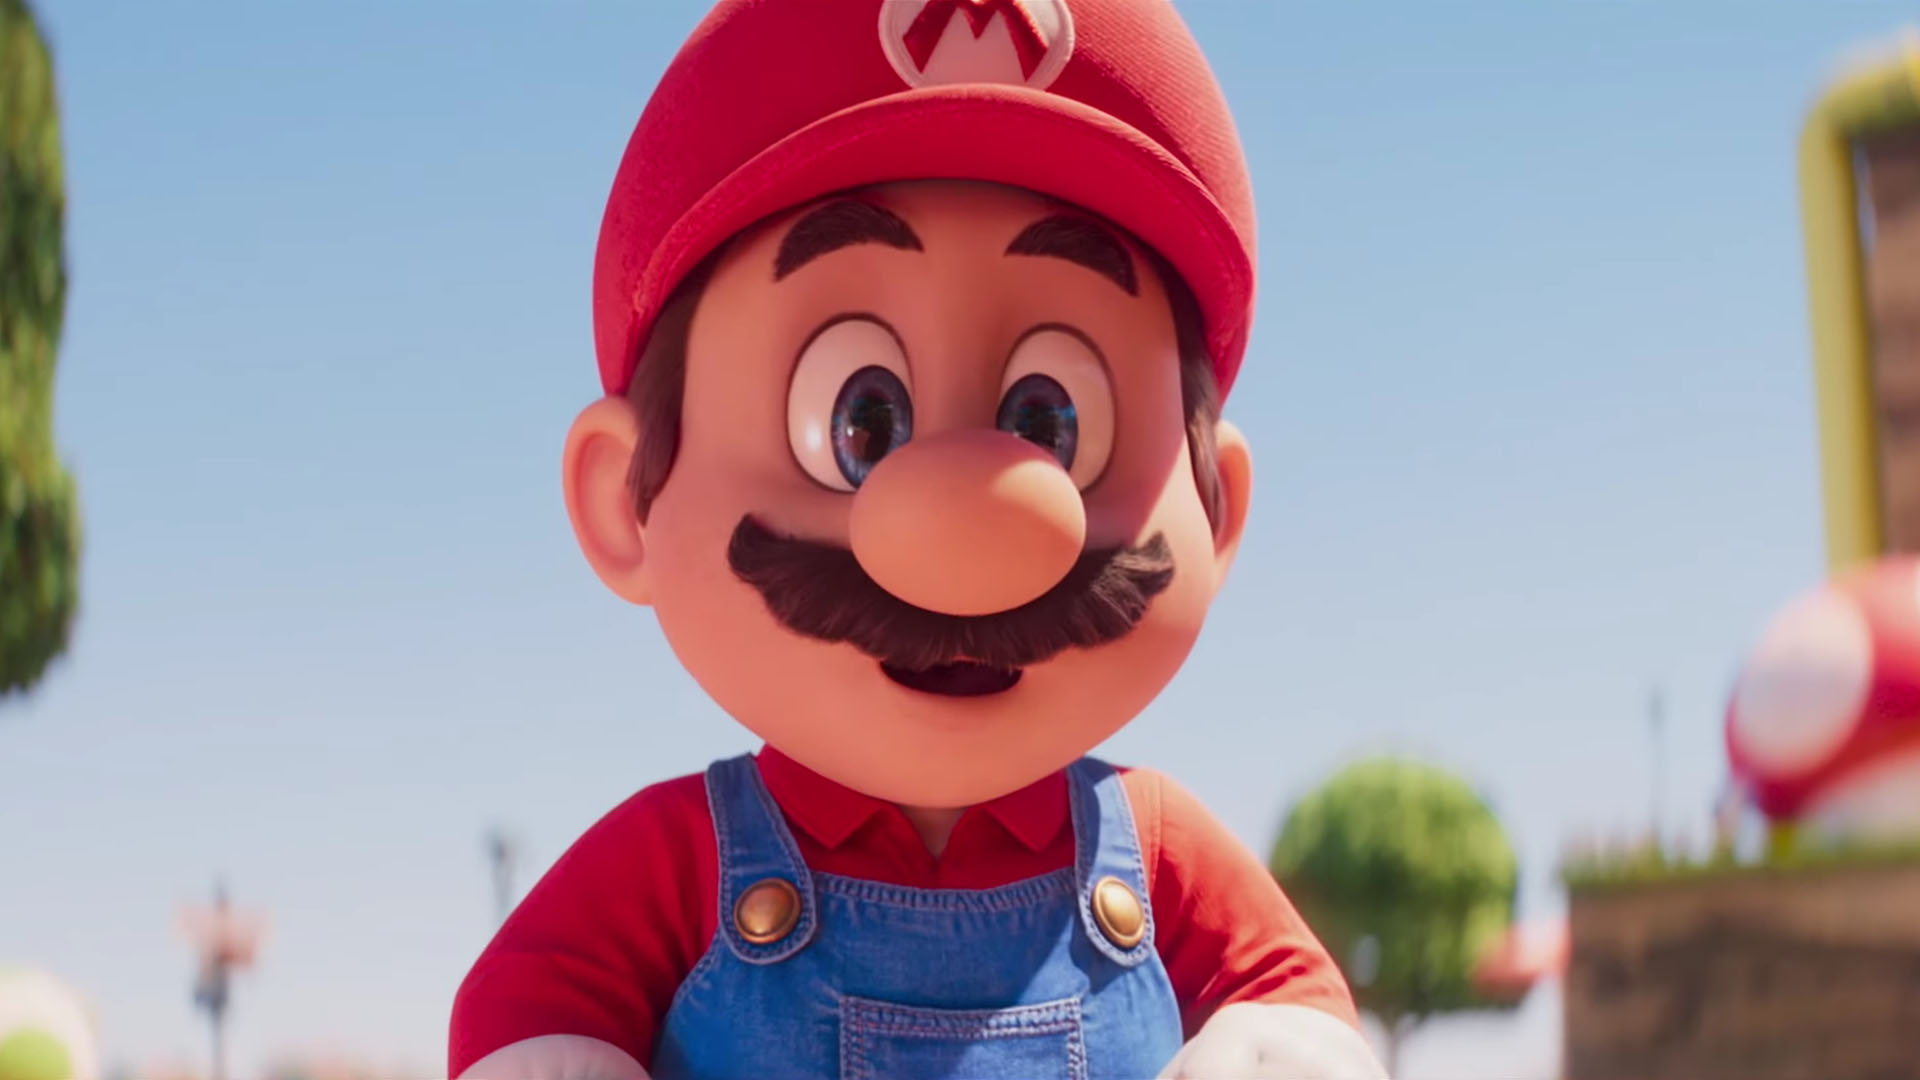 Super Mario Movie toys leak after a store breaks street date